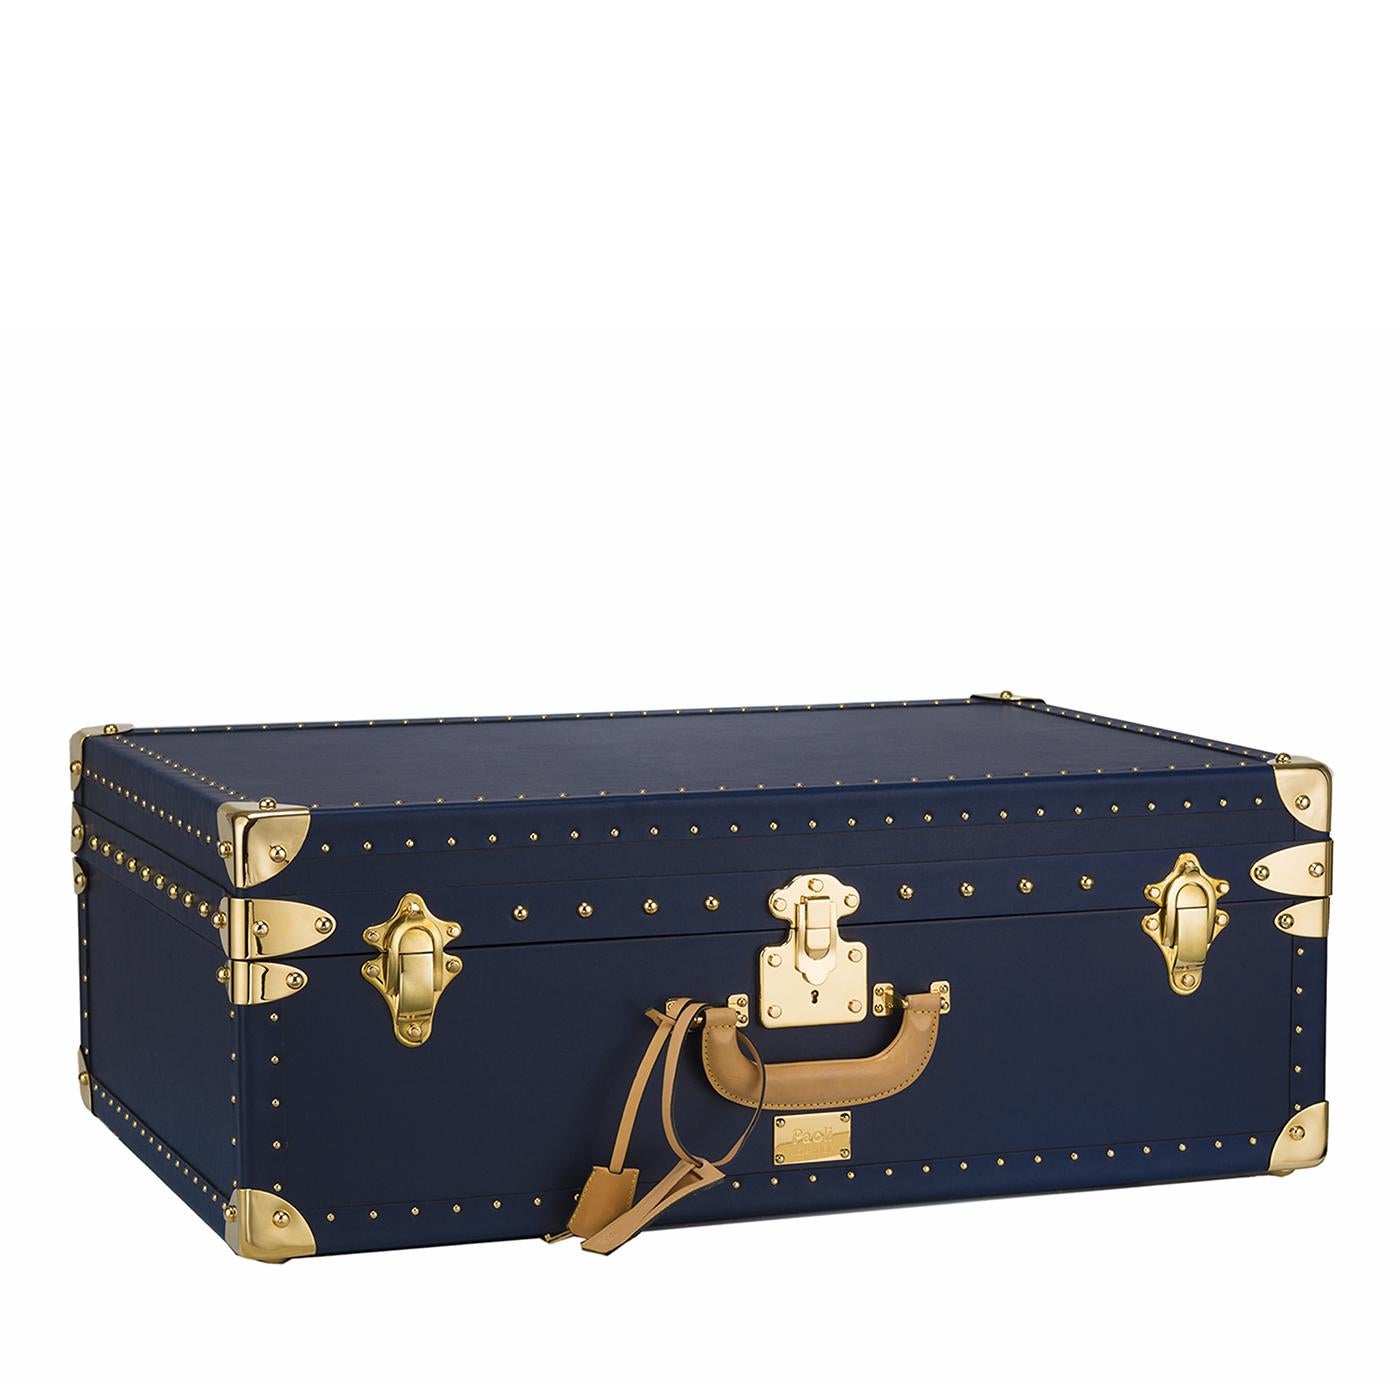 Part of the Royal Imperial collection, this suitcase is elegant and sturdy. It features an elegant navy blue leather cover and details in metal with a gold finish that are reminiscent of classic designs. The handles and the name tag are in natural